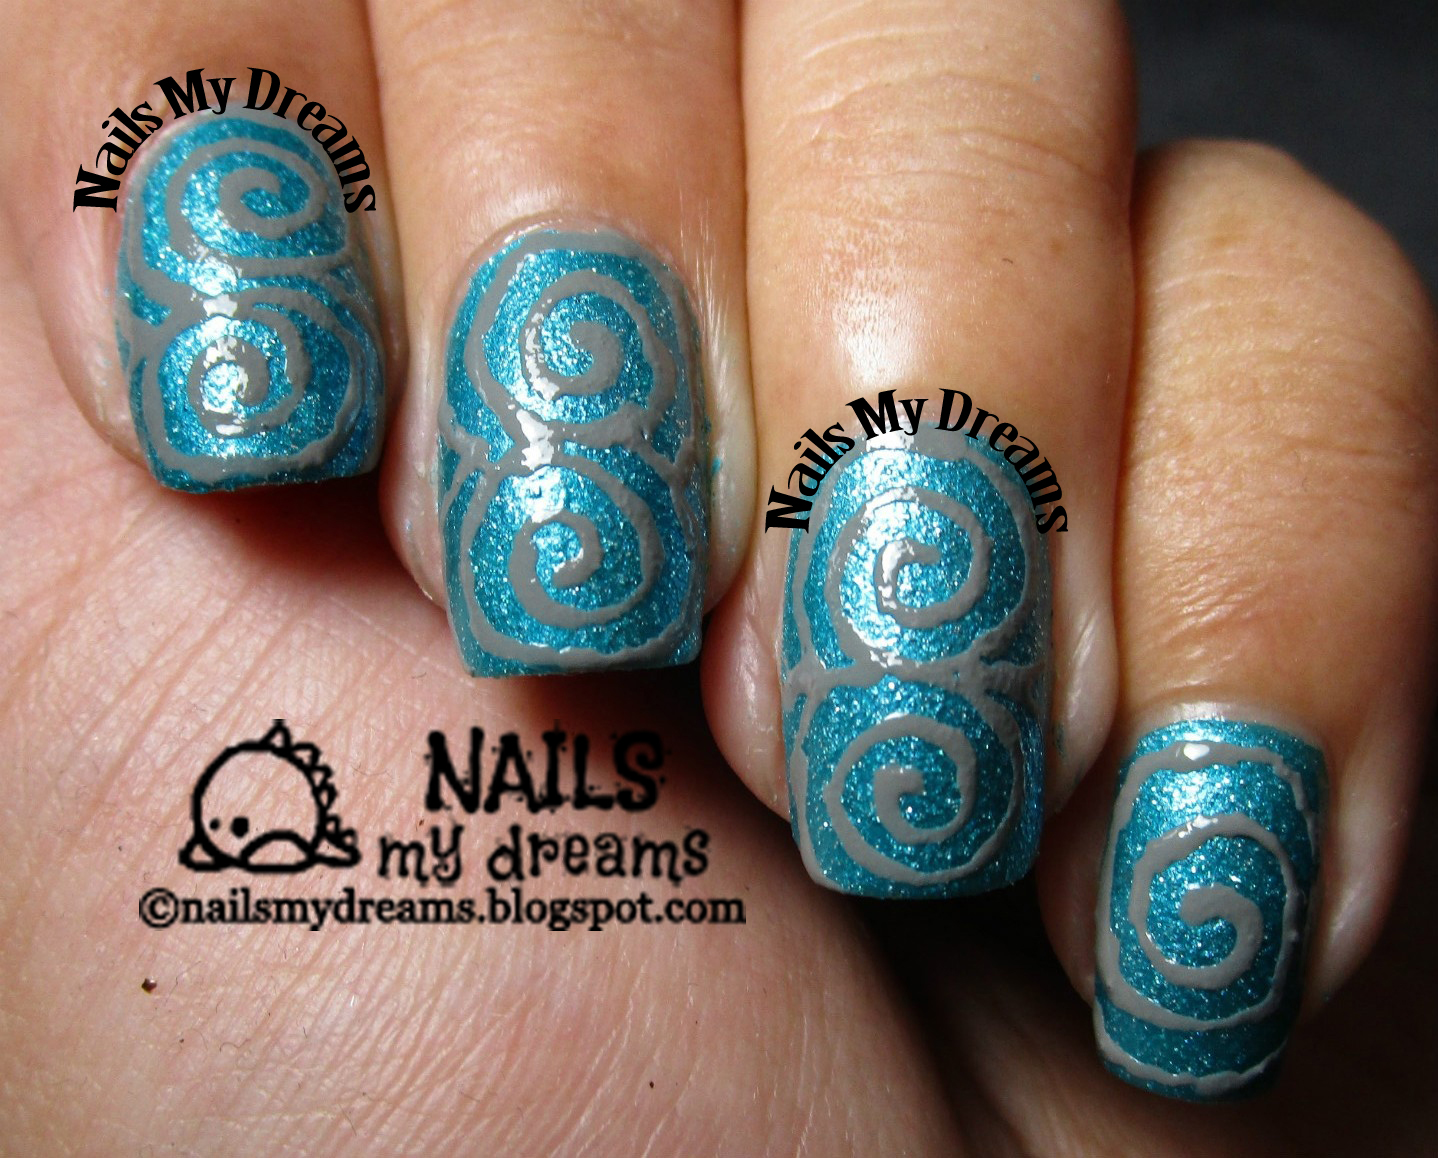 3. Floral Swirl Nail Art - wide 2